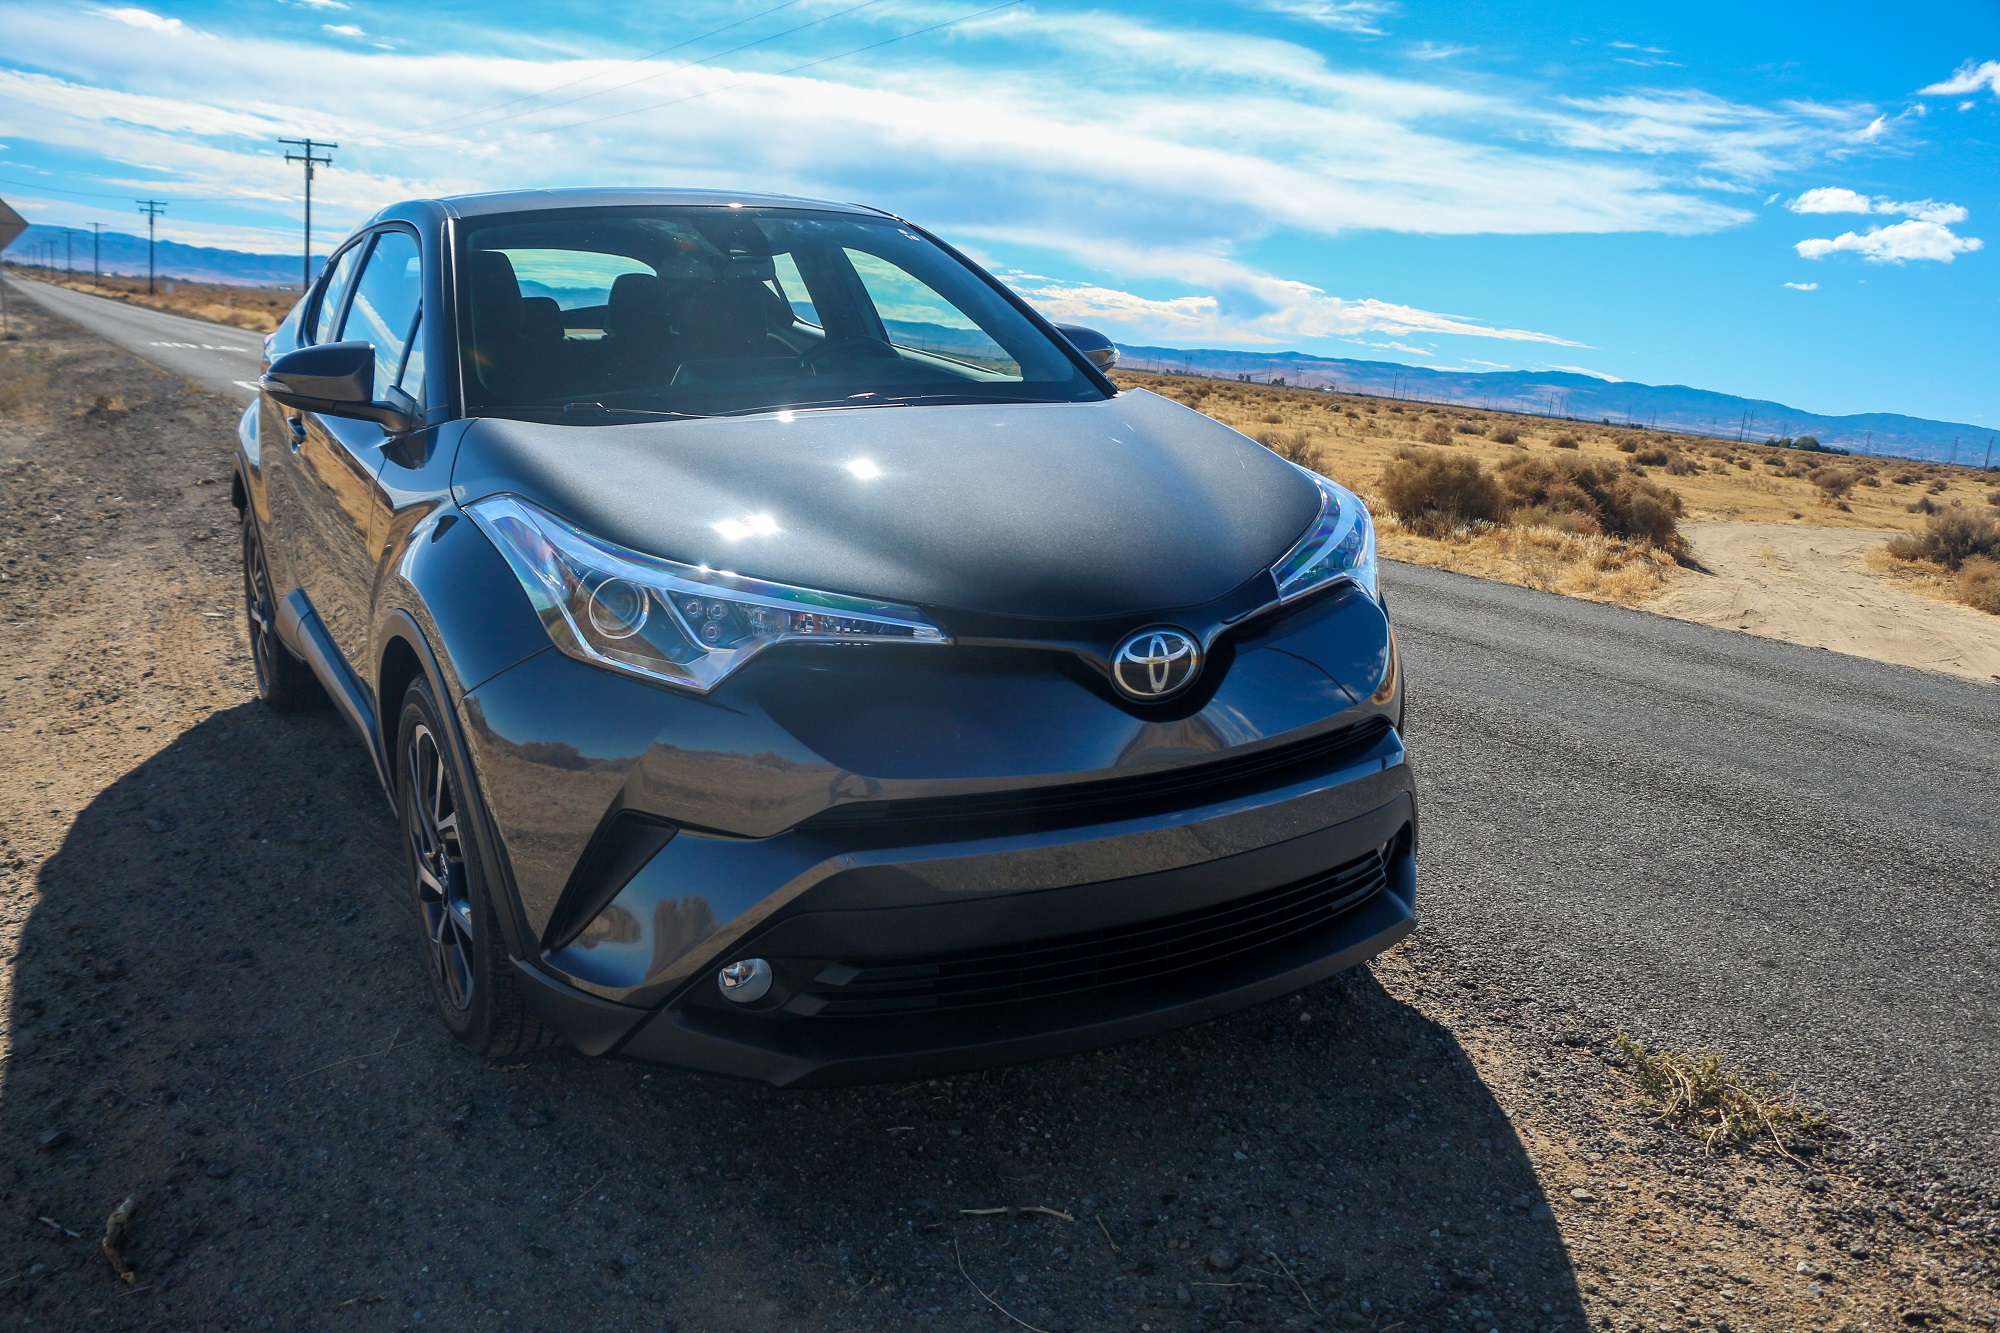 2018 2019 Toyota C-HR Compact SUV Tour Walkaround Review Buyers Guide ScionLife.com Jake Stumph